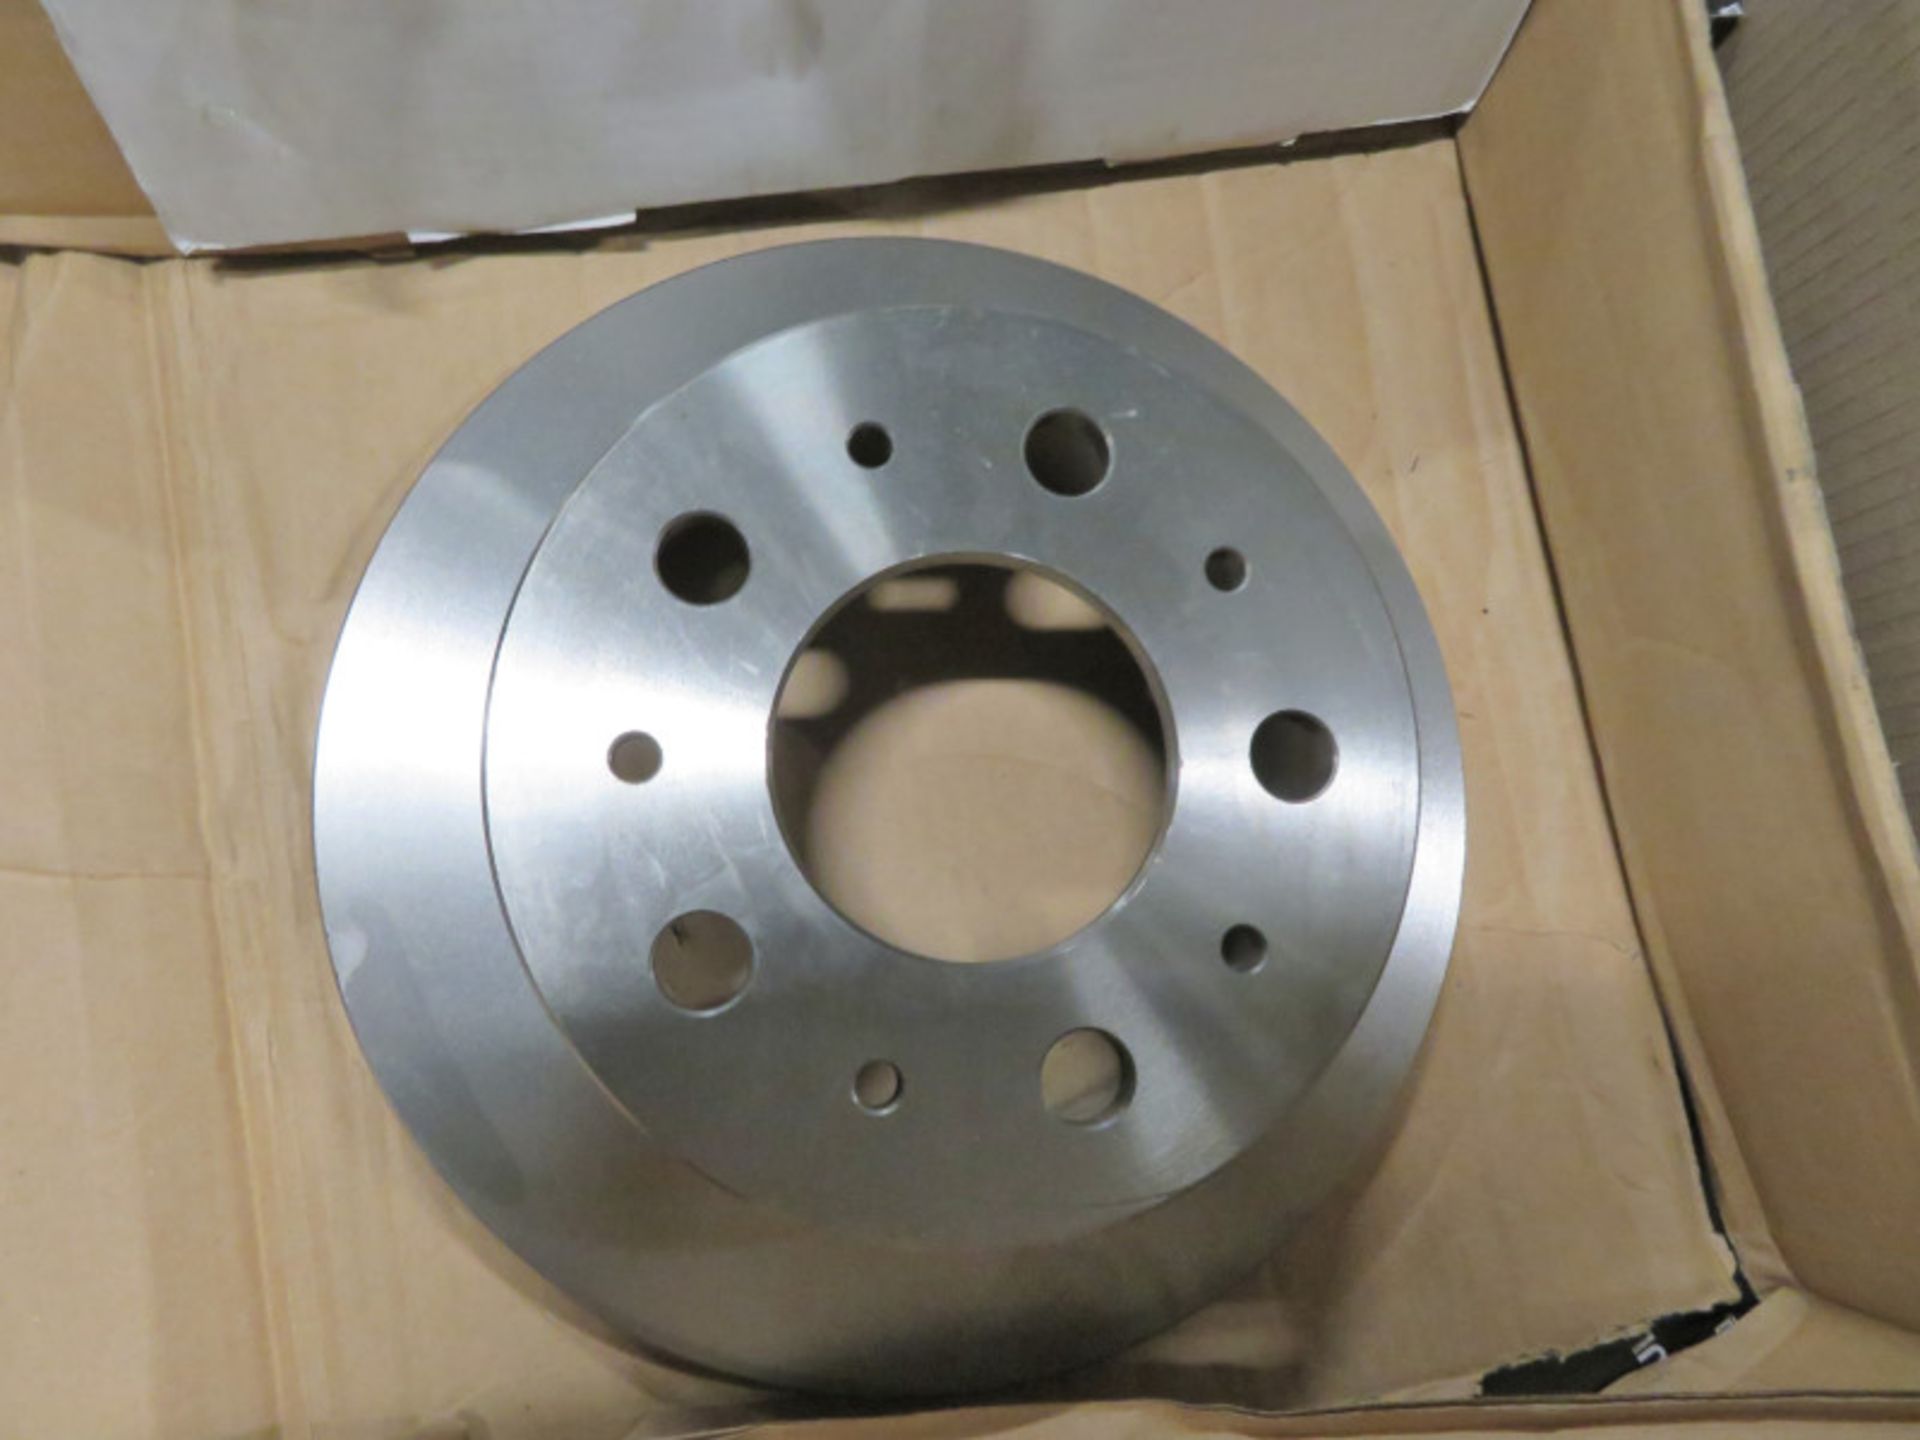 Vehicle Parts - Brake Discs, Clutch Kits & Starter Motors 2.2kw, 10T - see picture for iti - Image 2 of 8